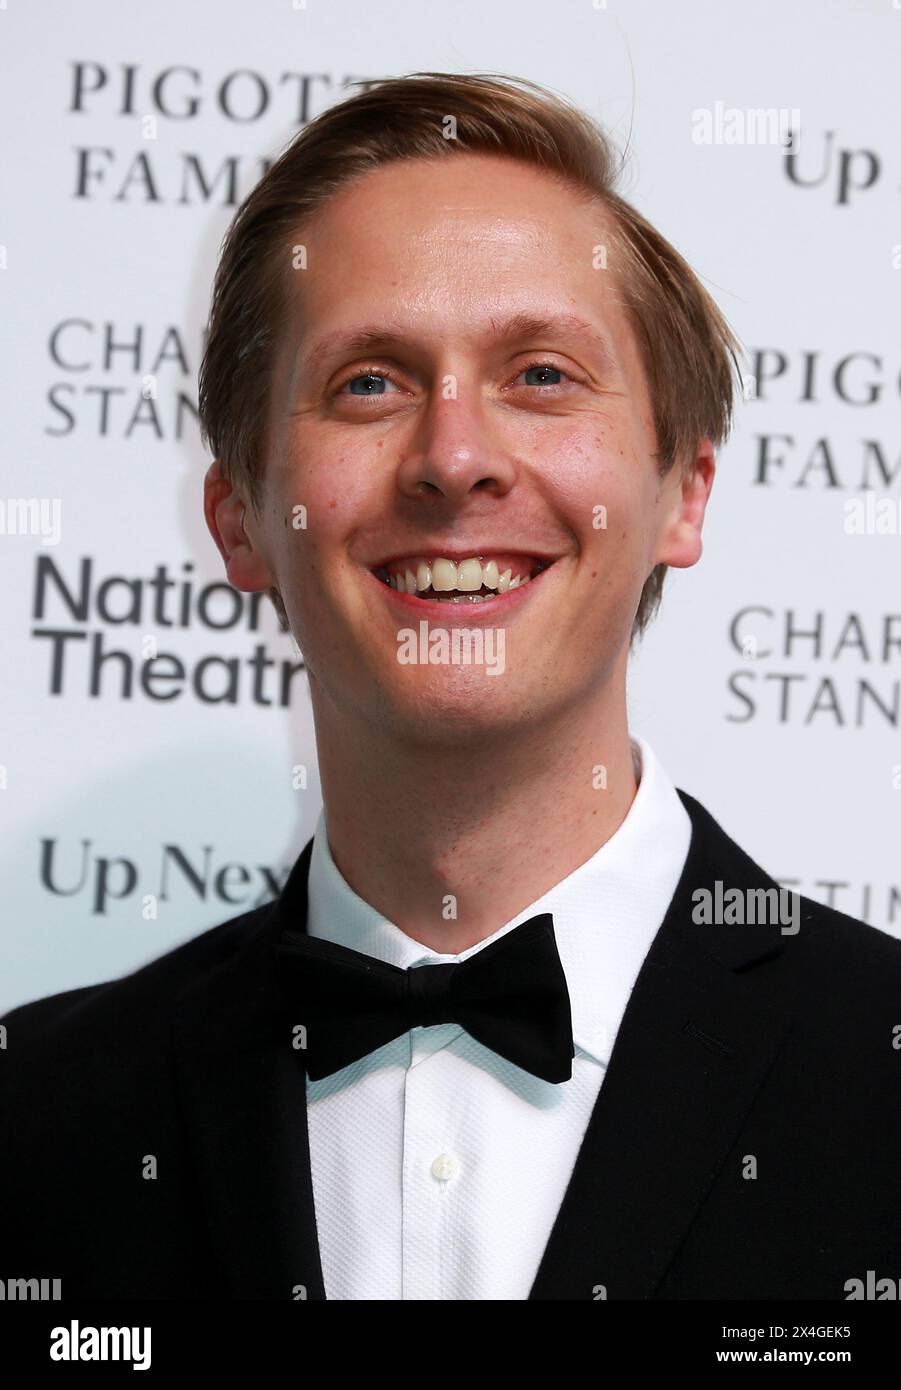 London, Großbritannien. Mai 2024. Will Close besucht die National Theatre 'Up Next' Gala im National Theatre in London. Quelle: SOPA Images Limited/Alamy Live News Stockfoto